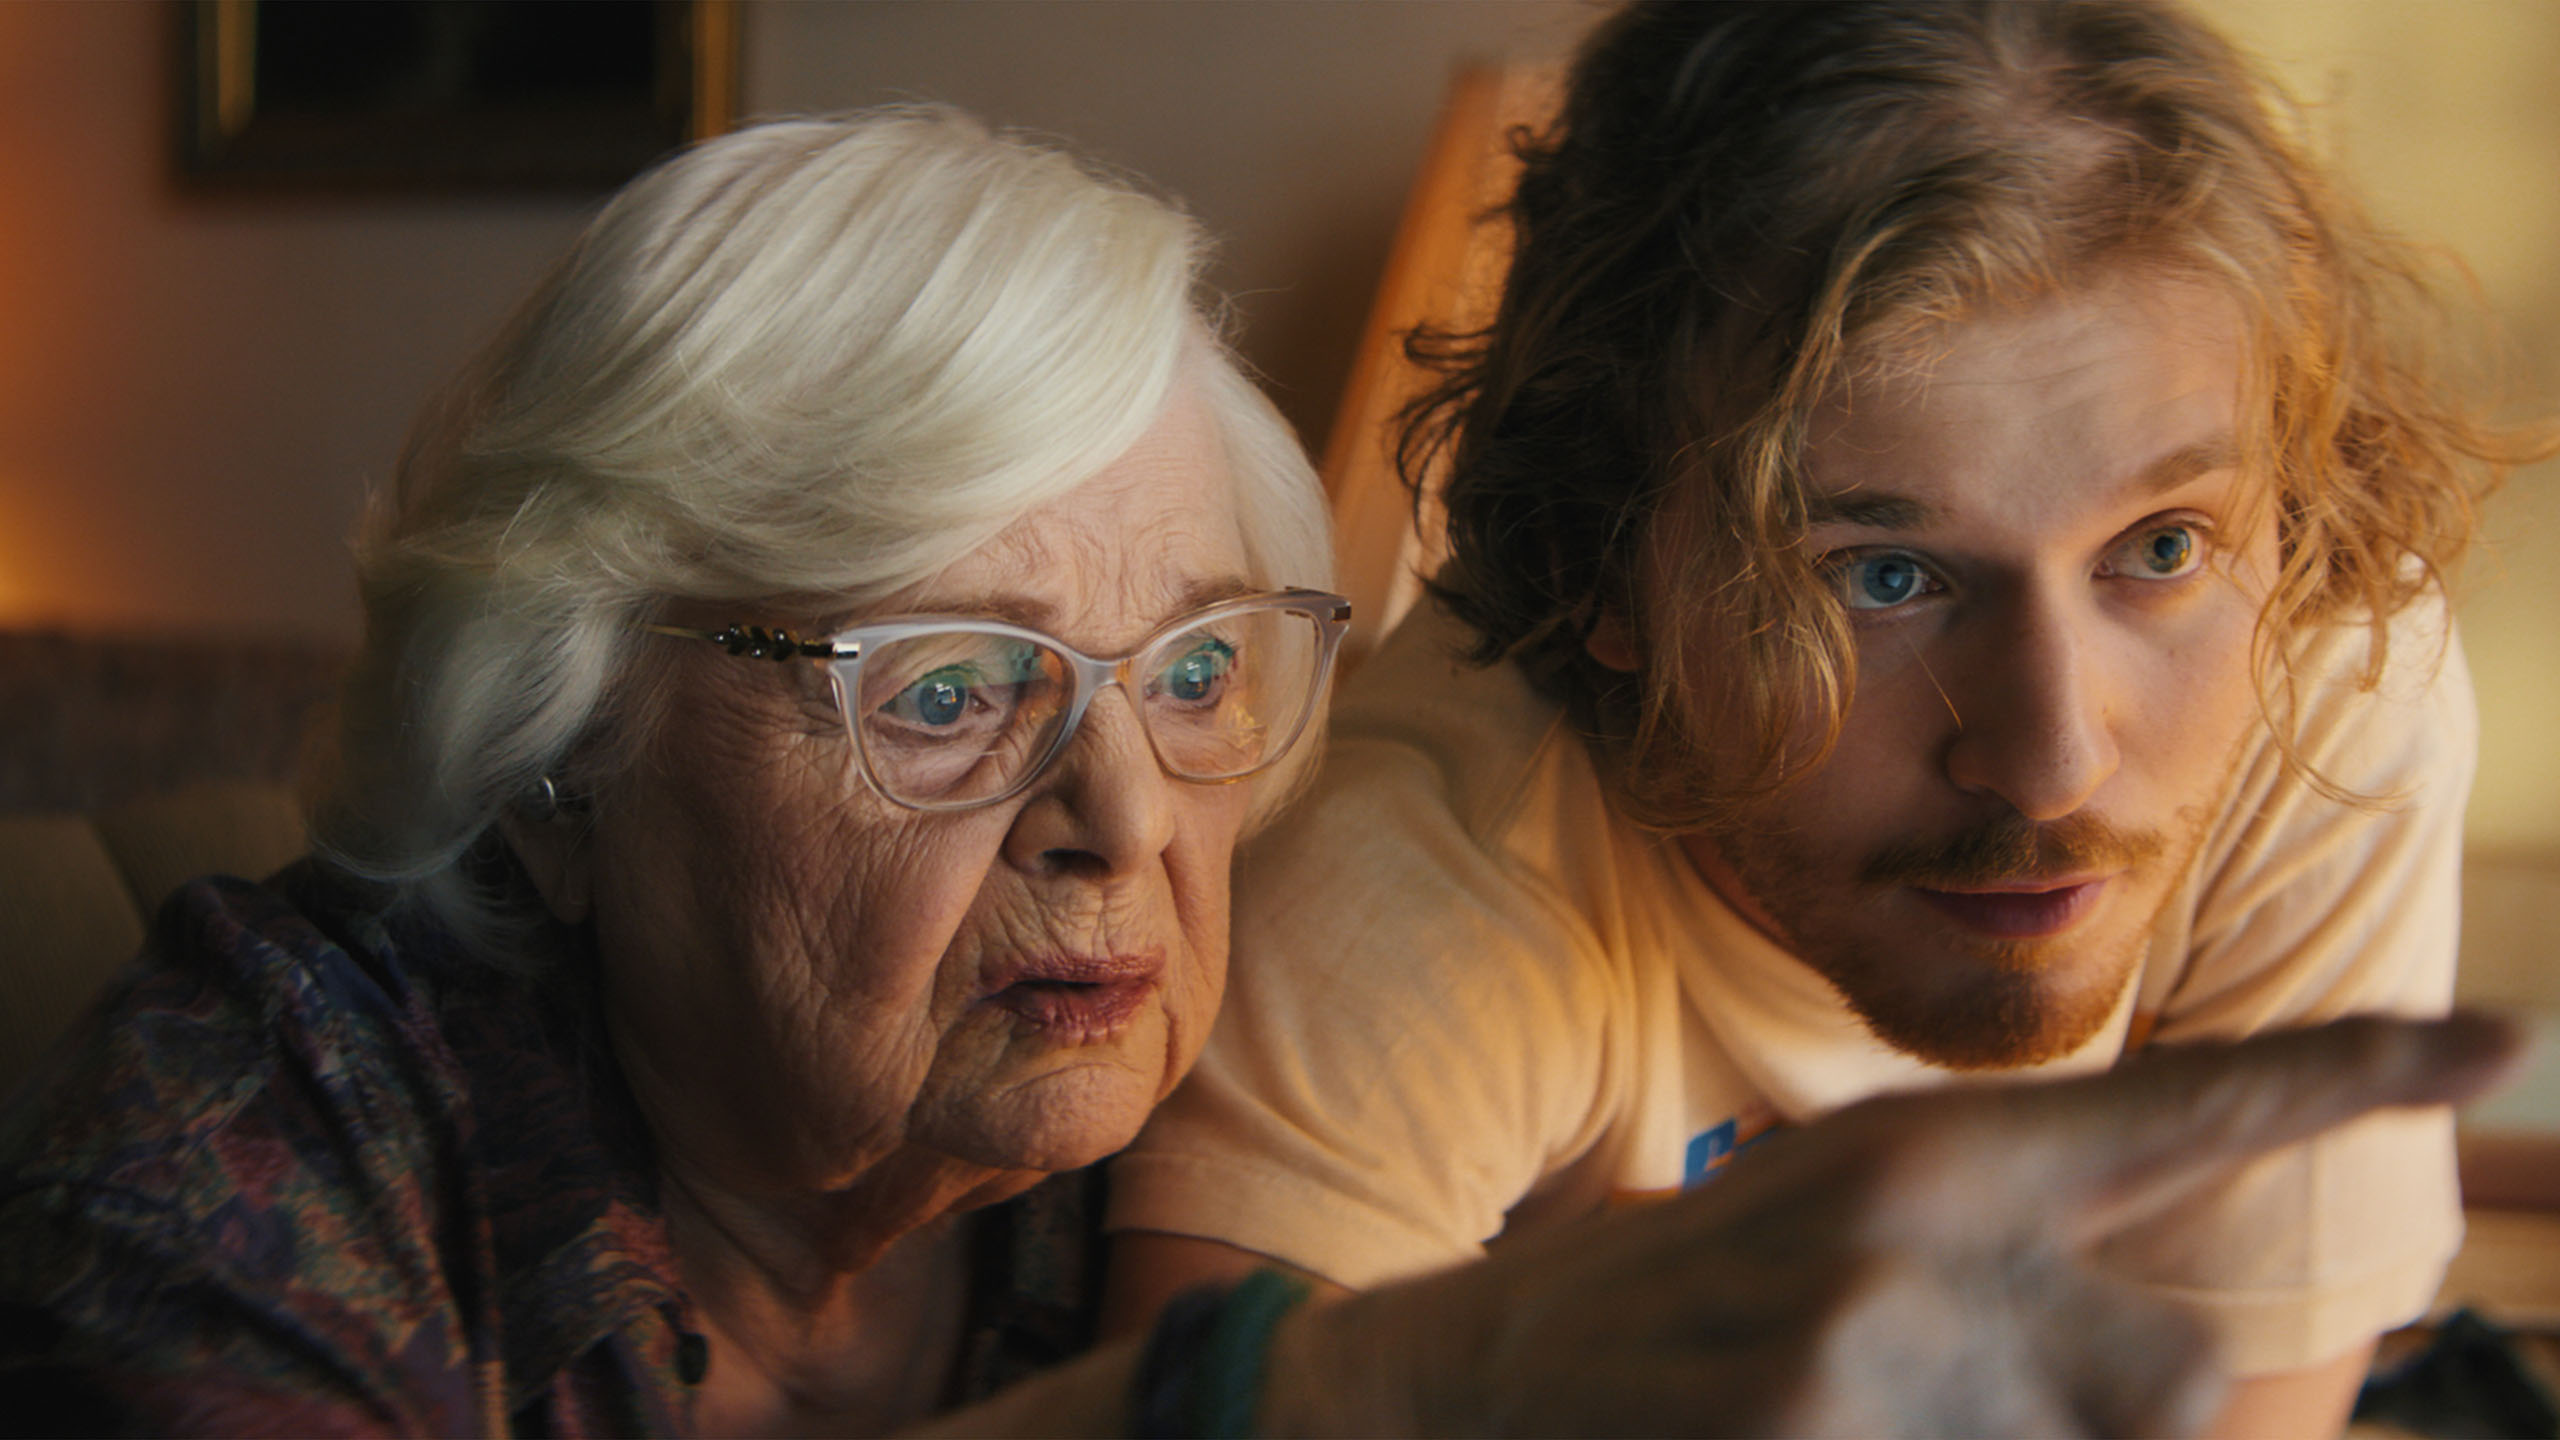 June Squibb and Fred Hechinger appear in Thelma by Josh Margolin, an official selection of the Premieres program at the 2024 Sundance Film Festival.